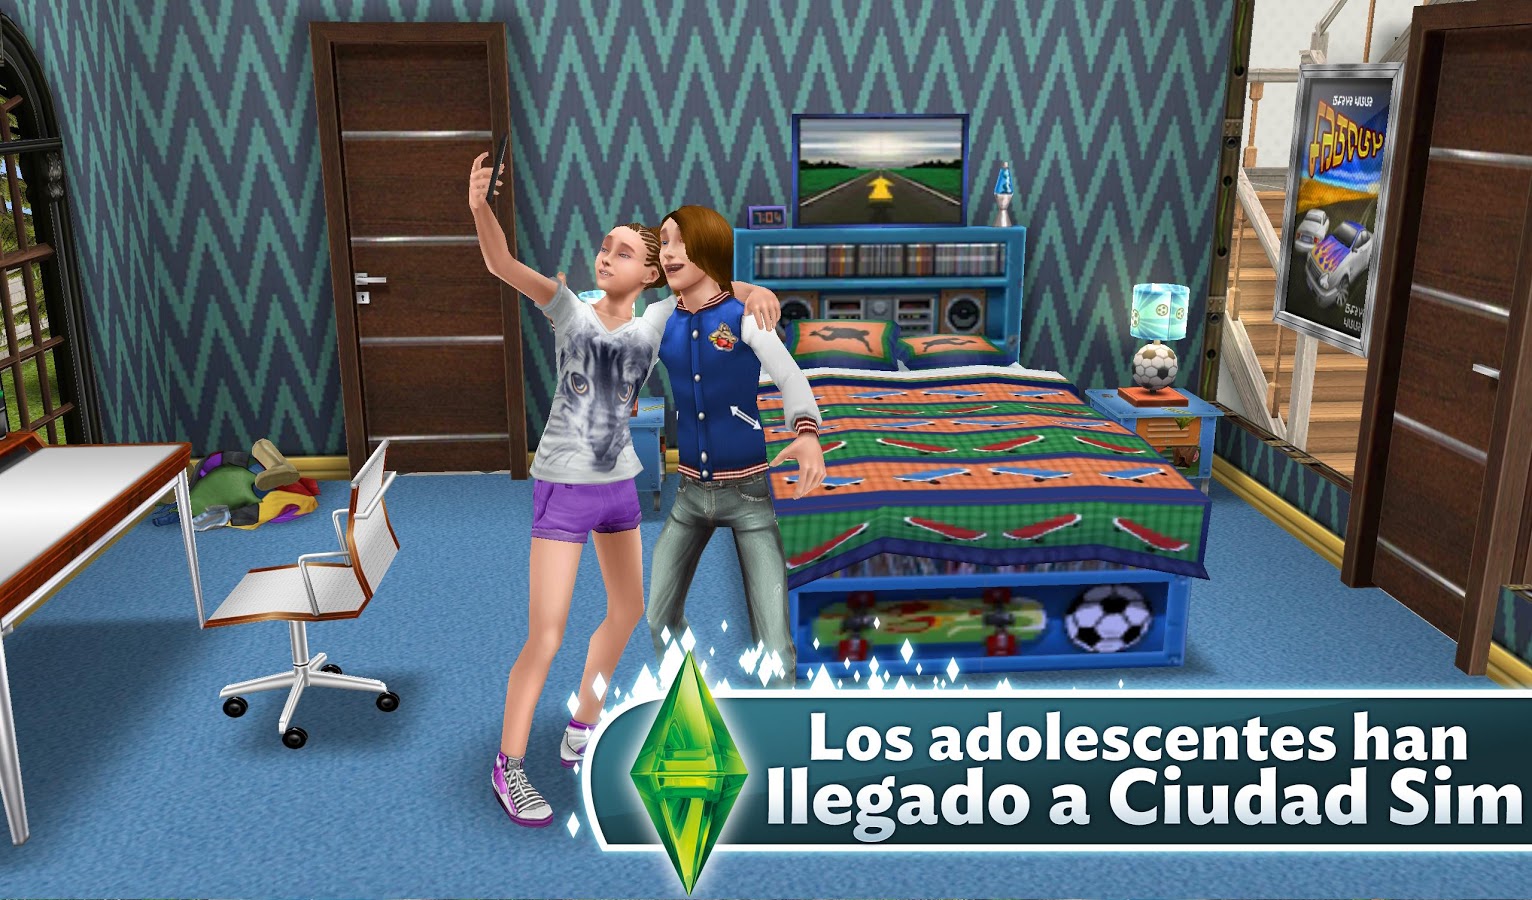 sims without download play sims 1 online free without download